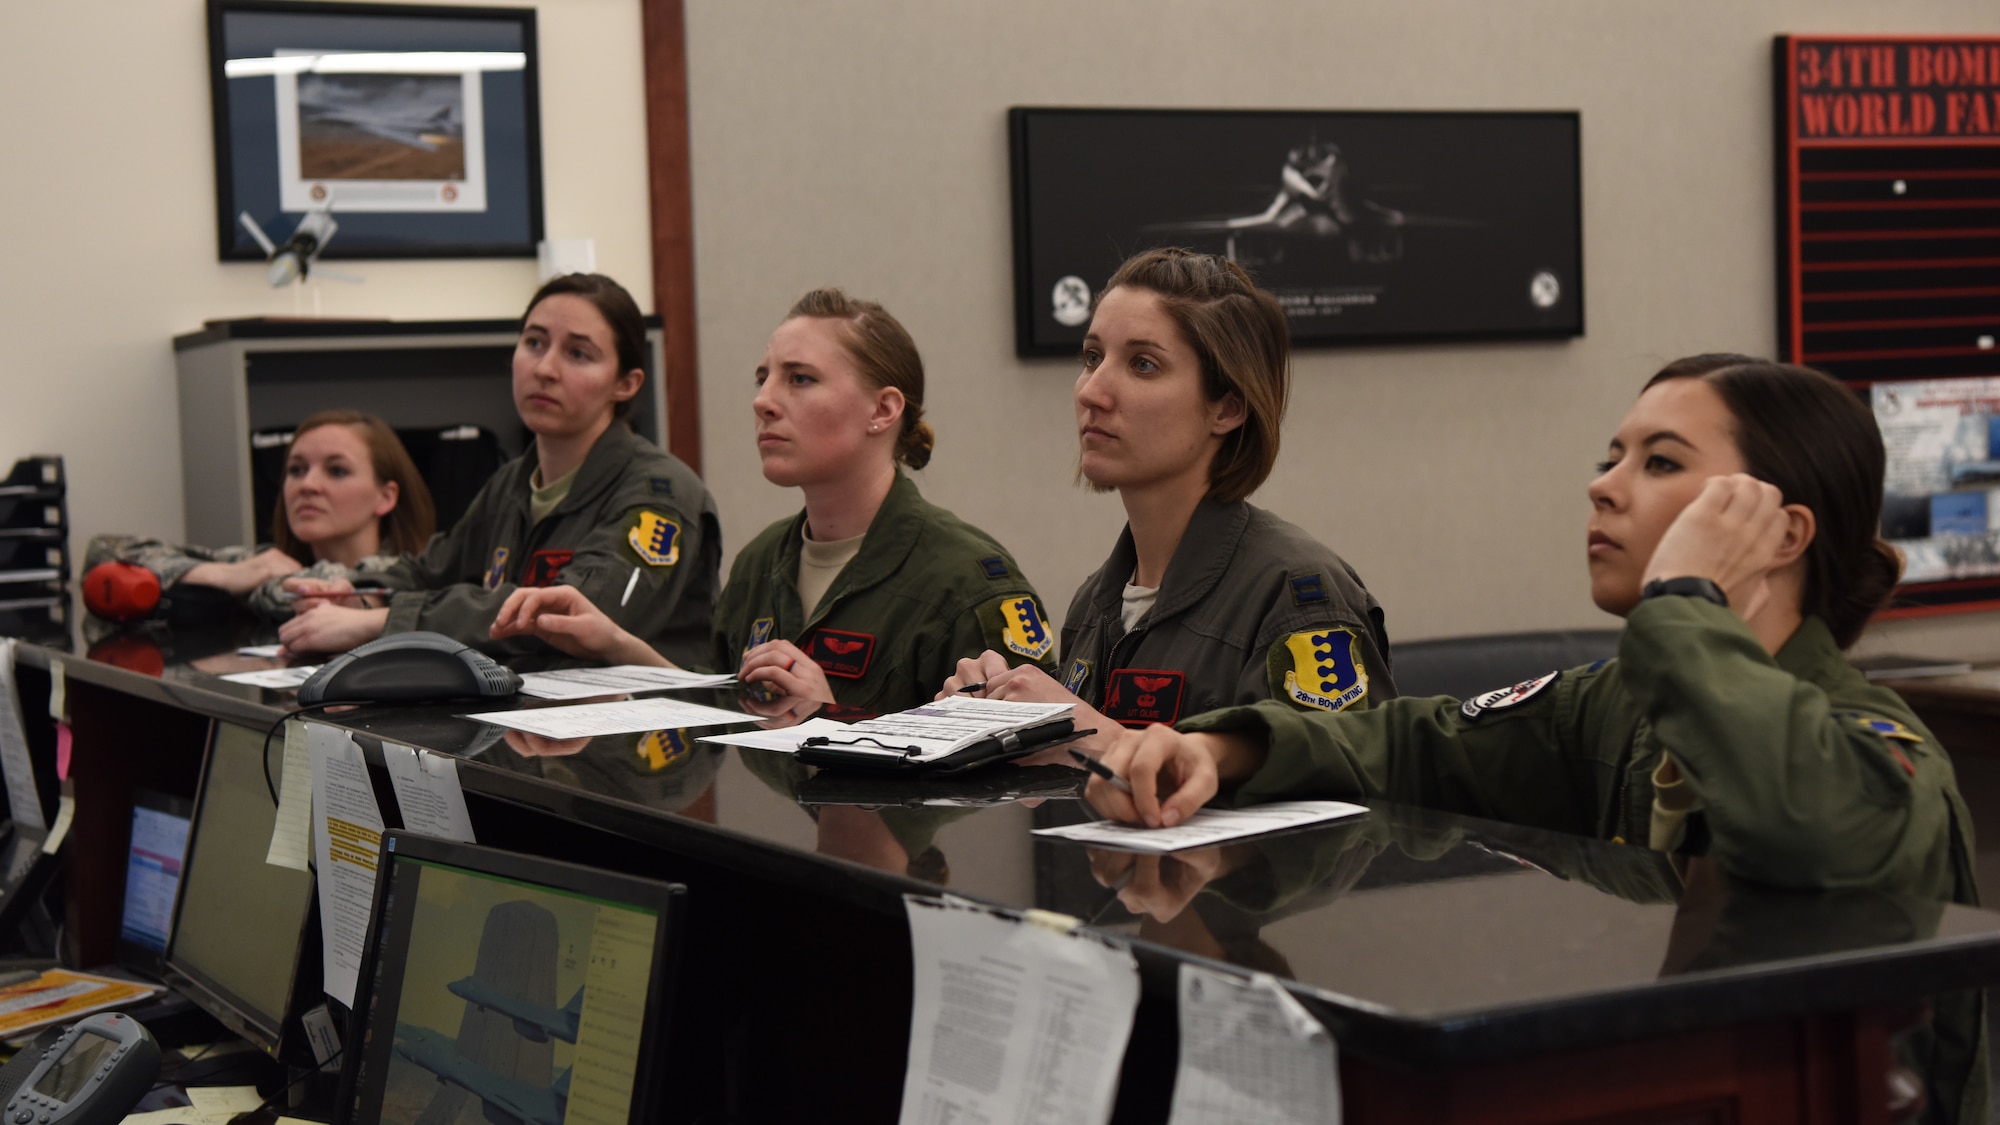 Capt. Lacey Koelling, 34th Aircraft Maintenance Unit officer in charge, and 34th Bomb Squadron members Capt. Lillian Pryor, a B-1 pilot; Capt. Danielle Zidack, a weapon systems officer; Capt. Lauren Olme, a B-1 pilot; and 1st Lt. Kimberly Auton, a weapon systems officer, conduct a preflight briefing prior to an all-female flight out of Ellsworth Air Force Base, S.D., March 21, 2018. The flight was in honor of Women�s History Month and consisted of routine training in the local area. (U.S. Air Force photo by Staff Sgt. Jette Carr)